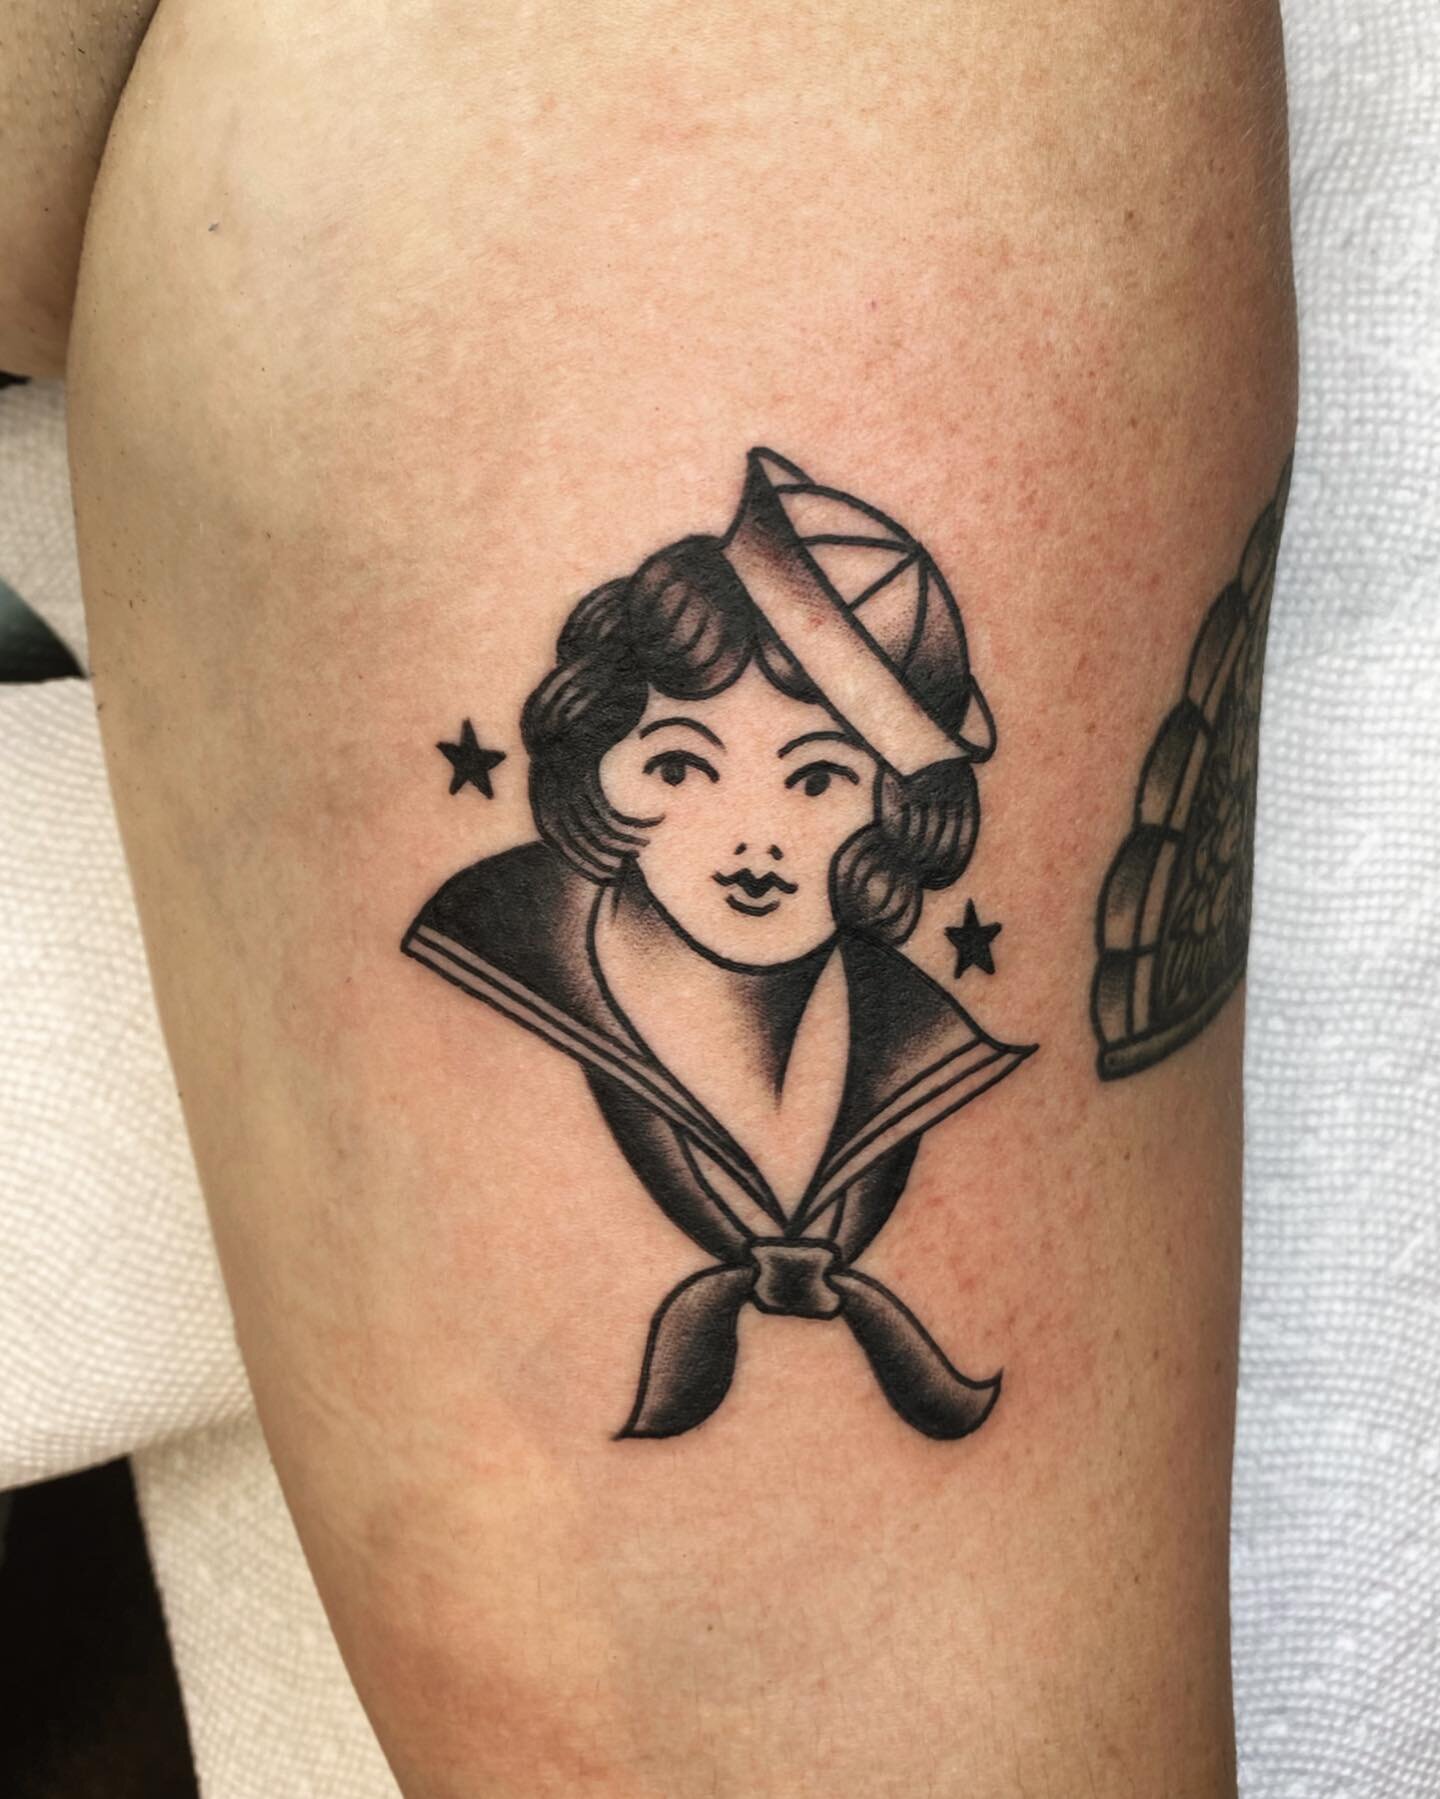 traditional lady for megan, thanks for coming back!

done at @familytattoo